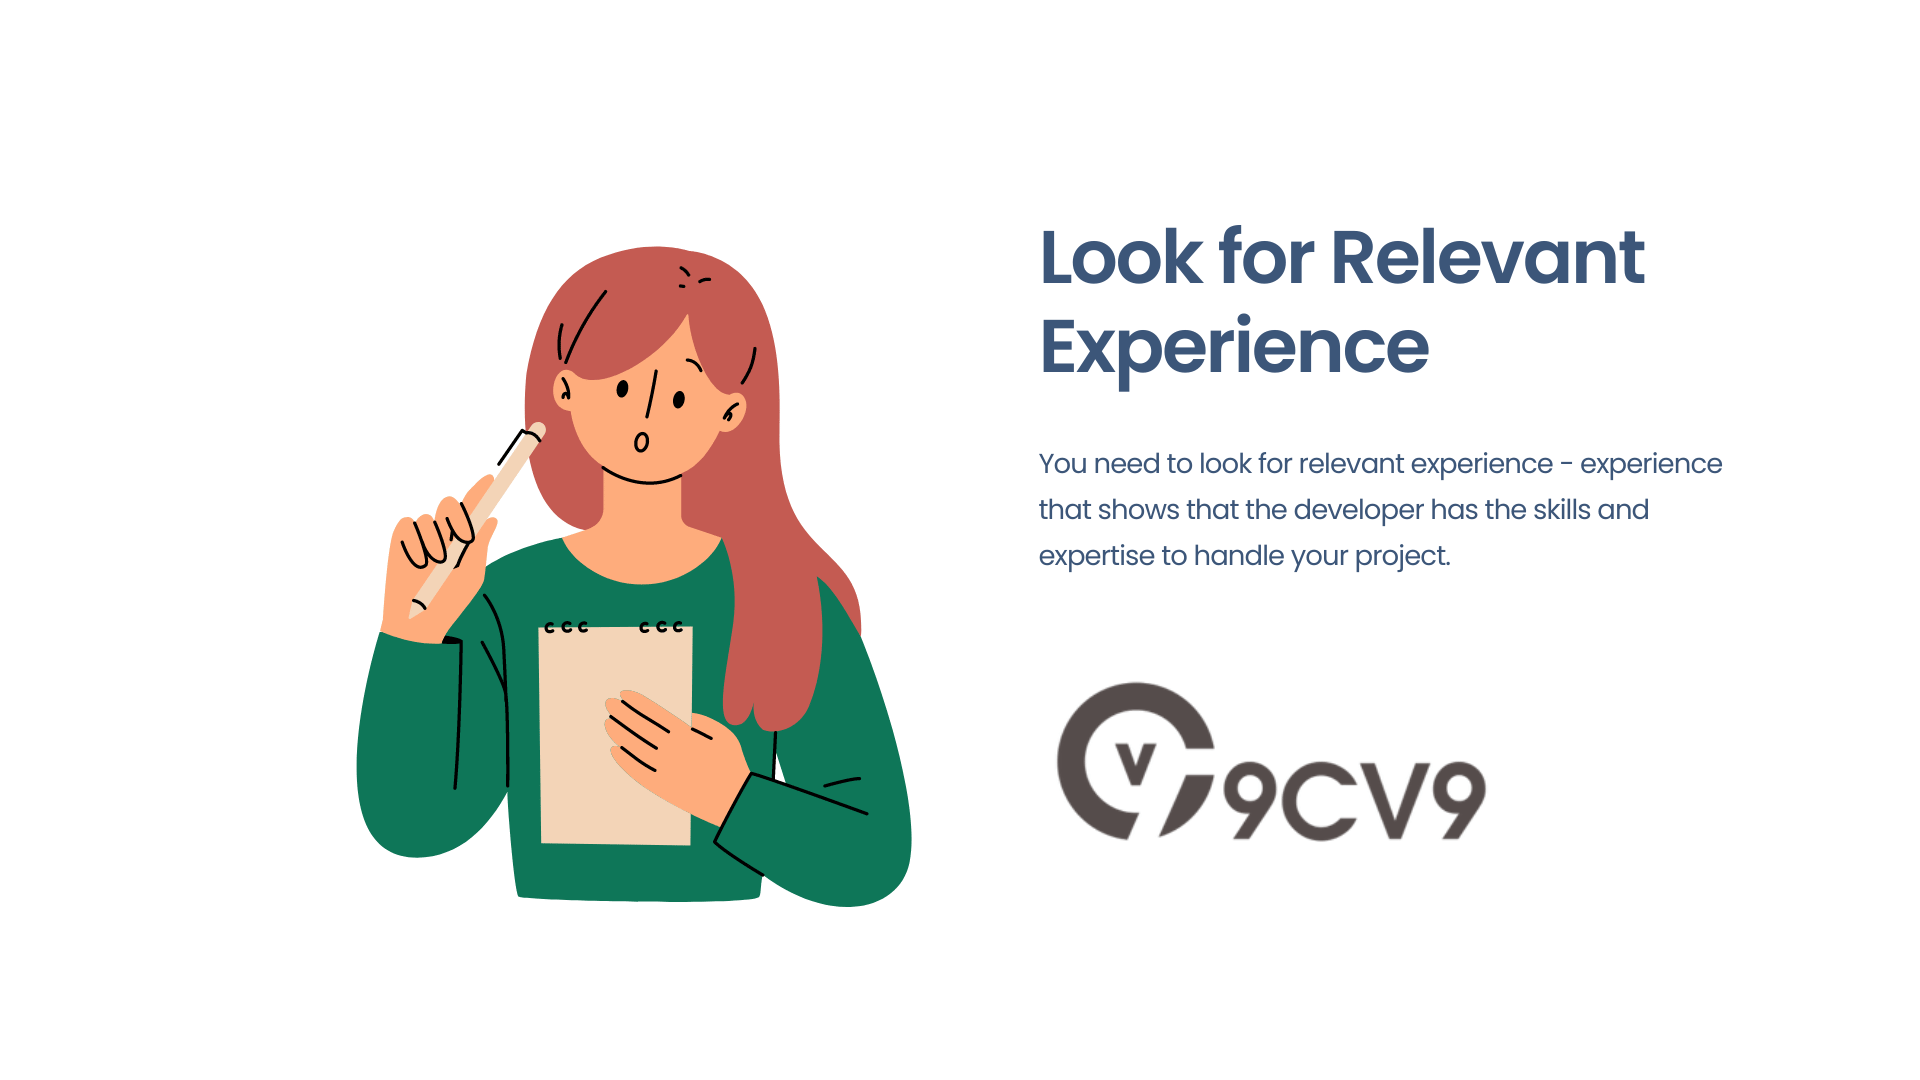 Look for Relevant Experience